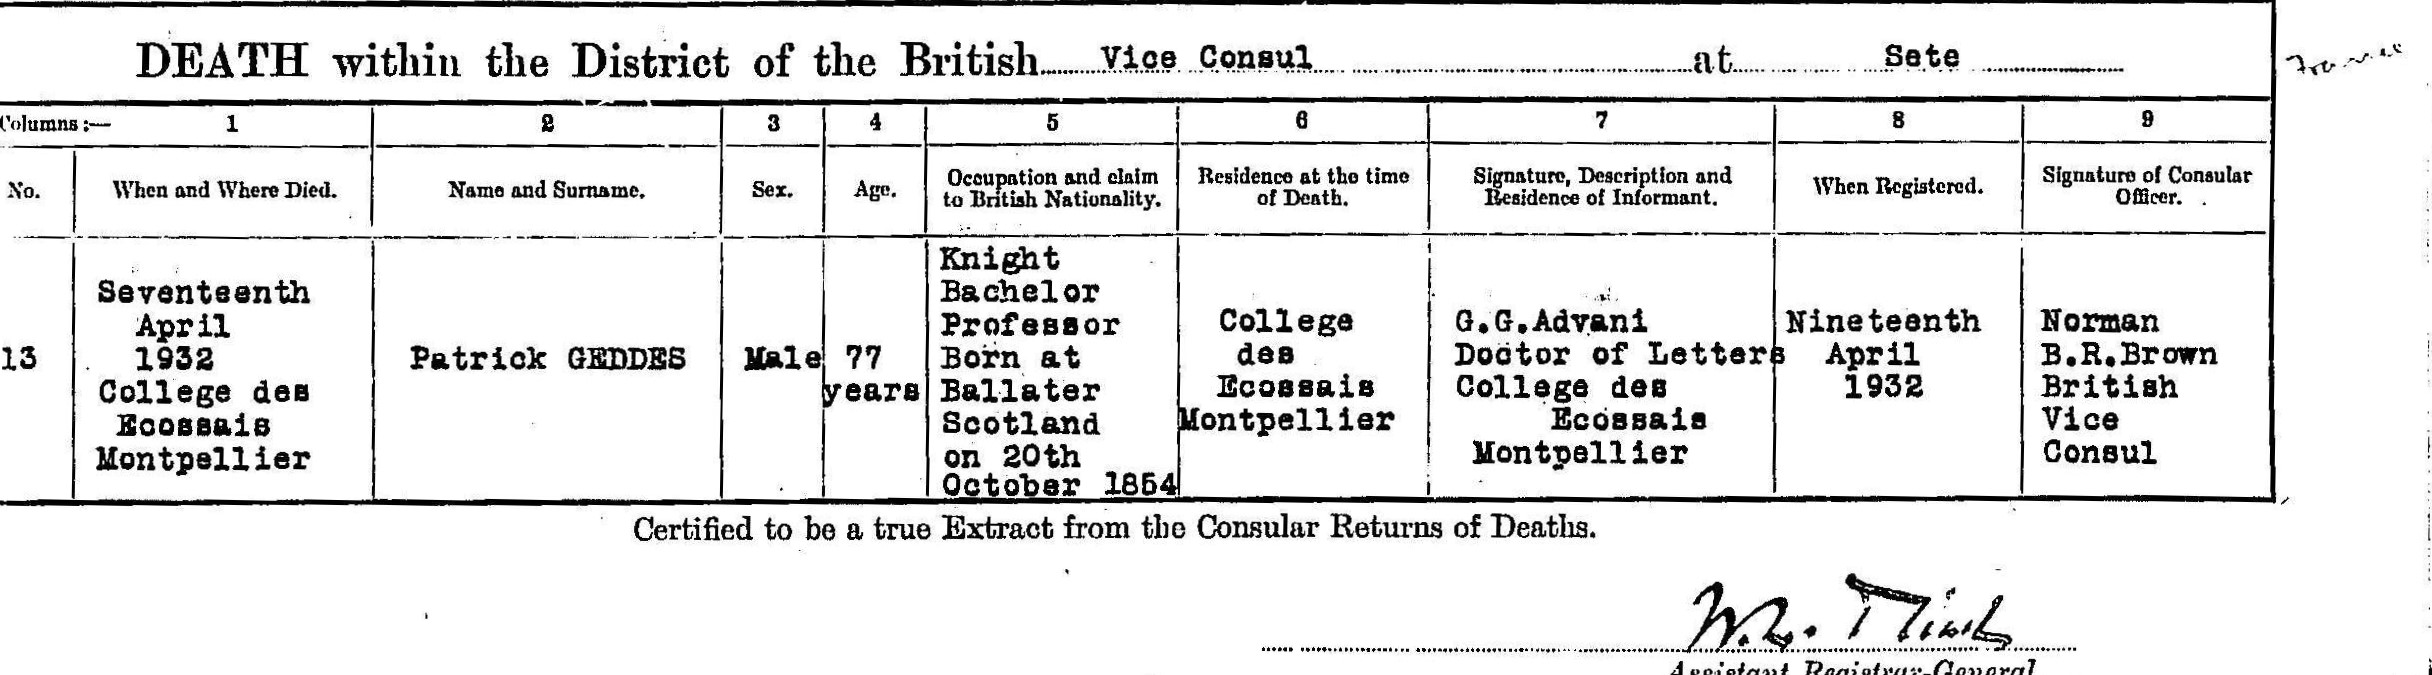 Death entry for Patrick Geddes, 1932